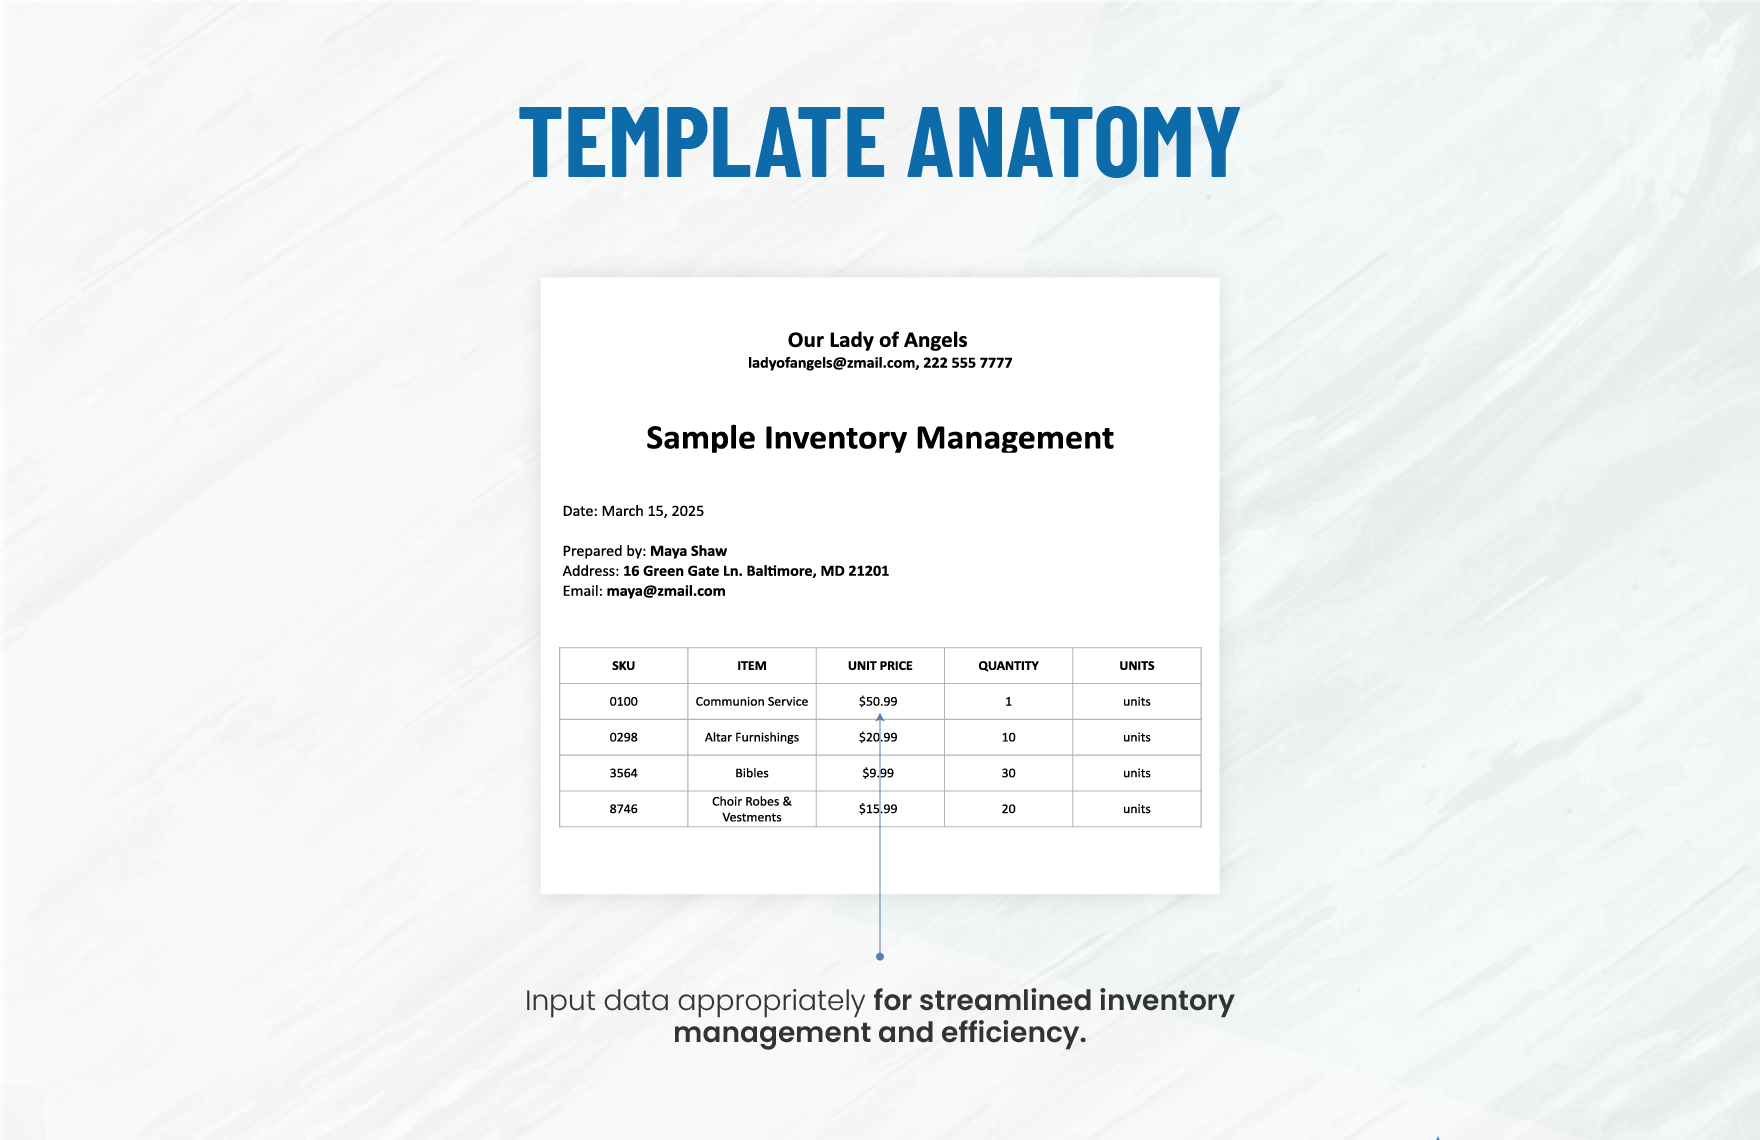 Sample Inventory Management Spreadsheet Template